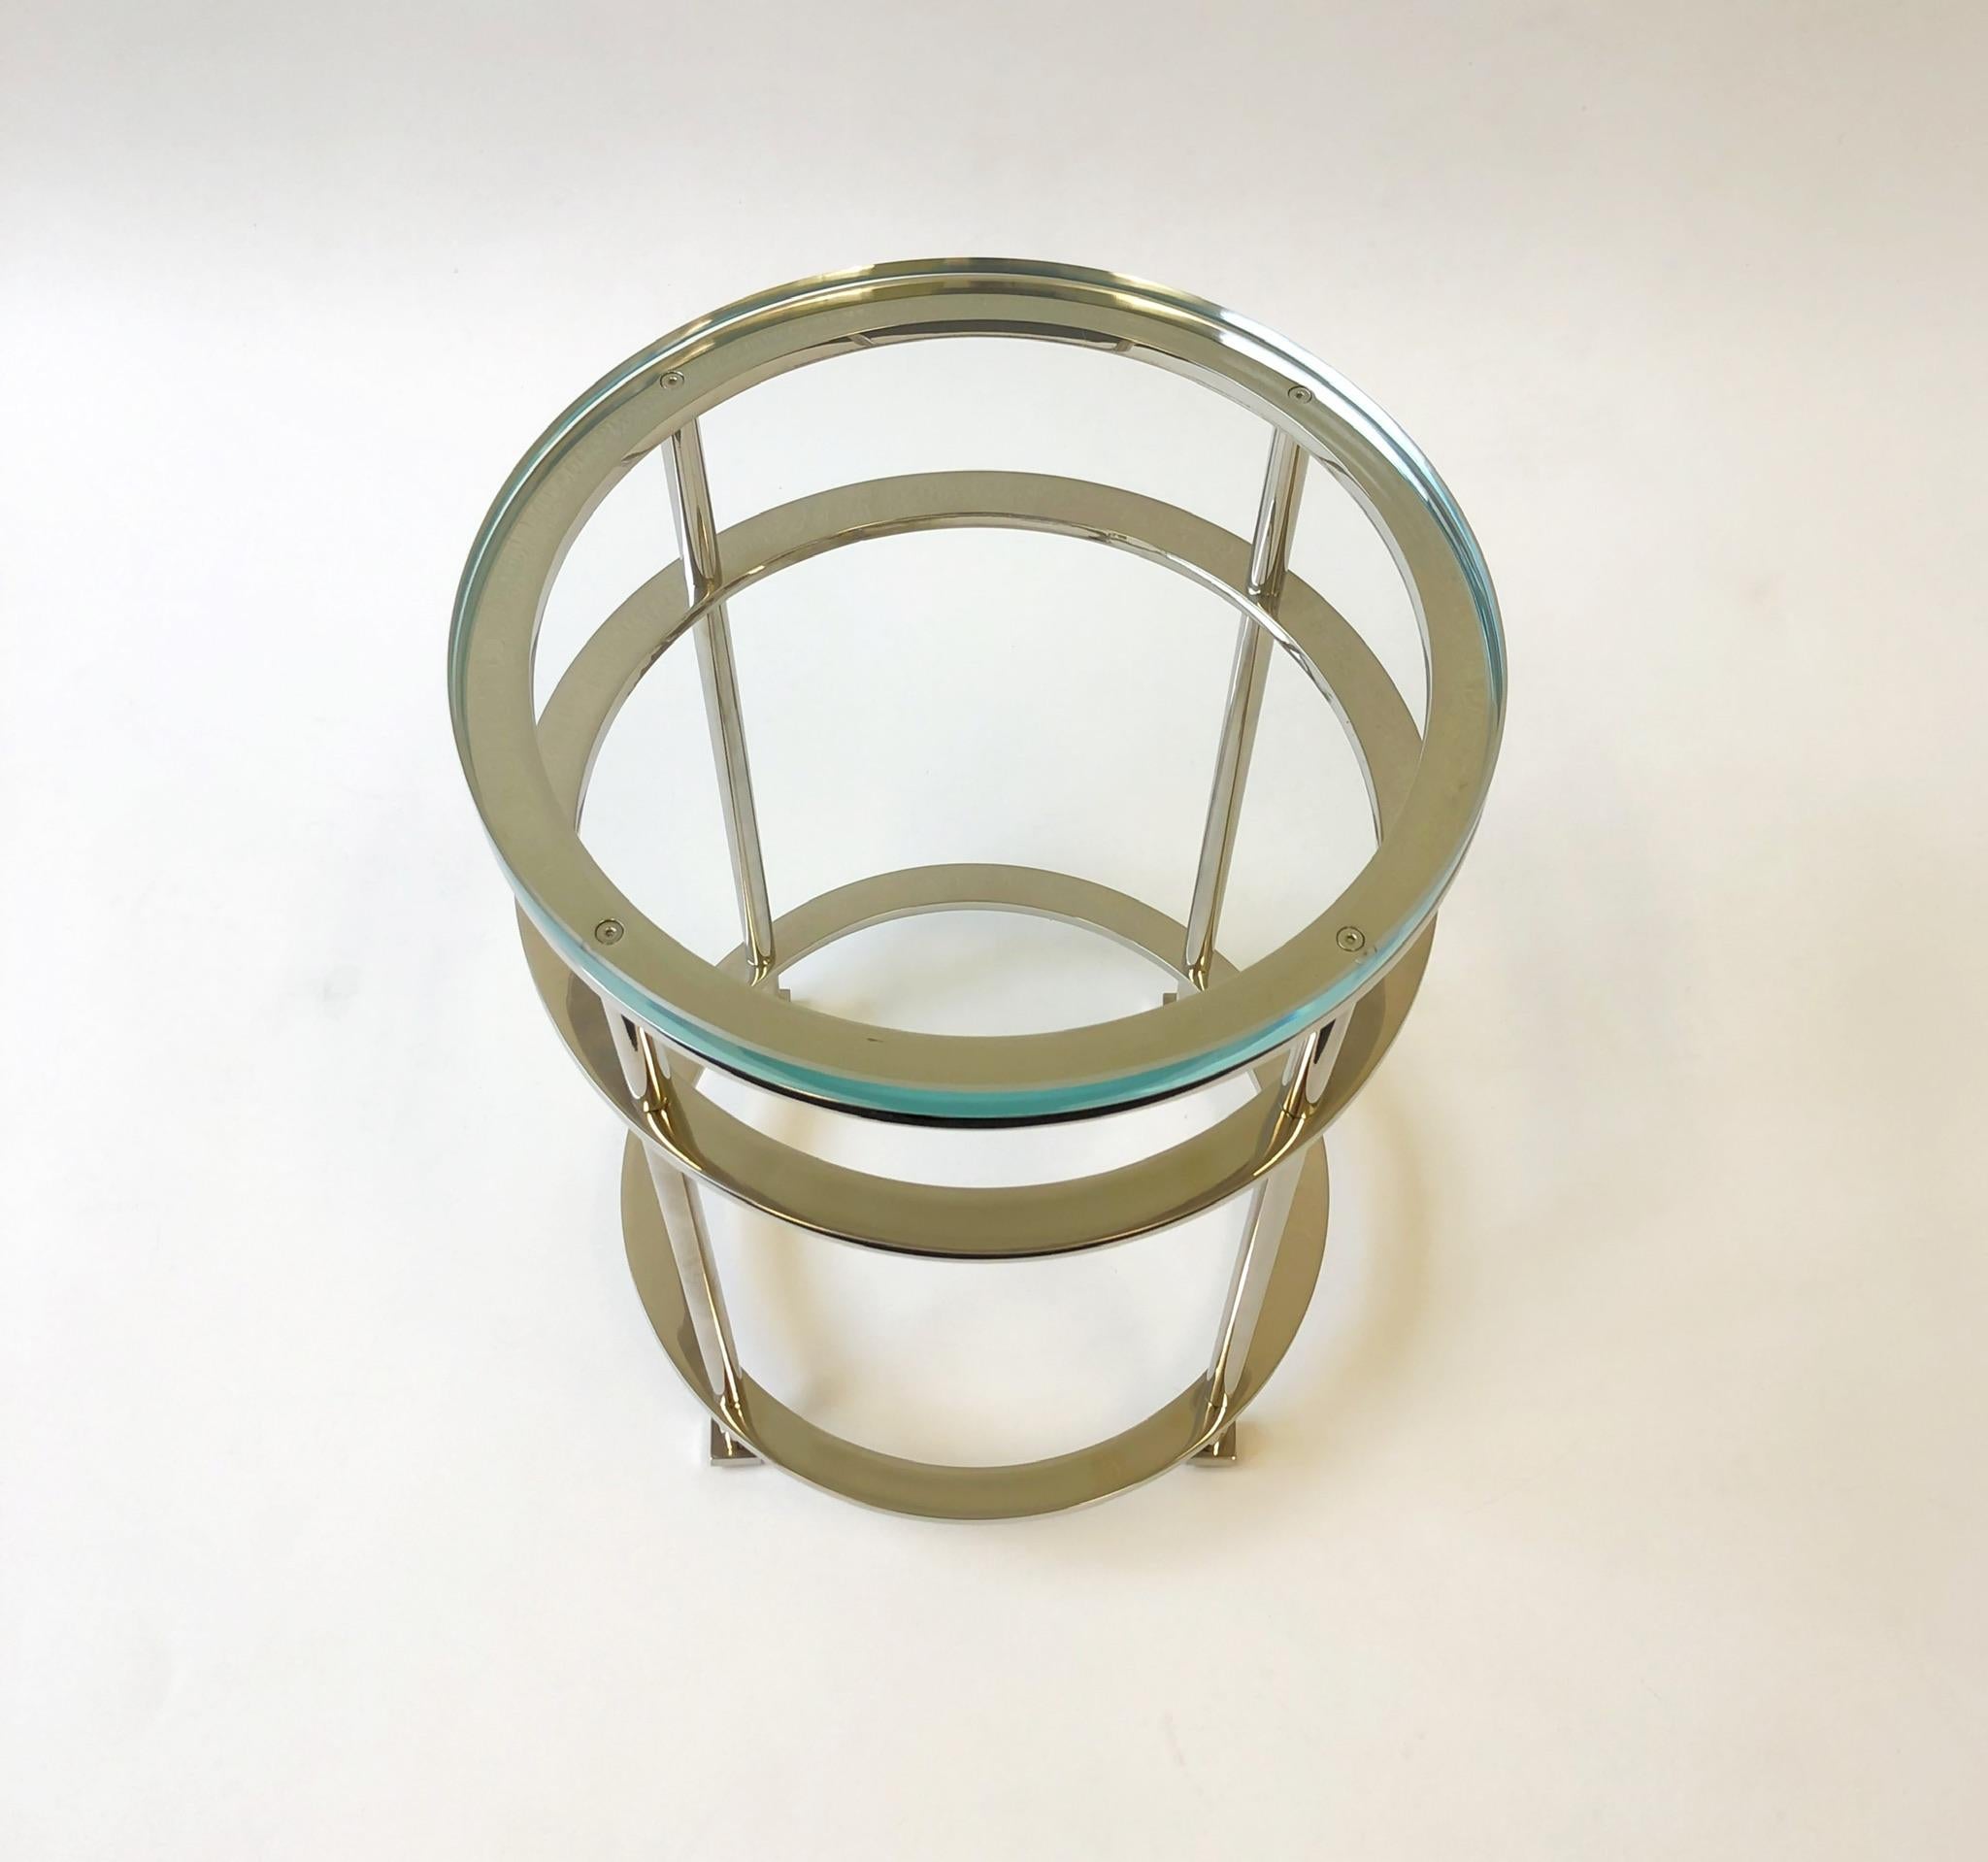 Pair of Nickel and Lucite Side Tables by Jean Michel Wilmotte for Mirak 1